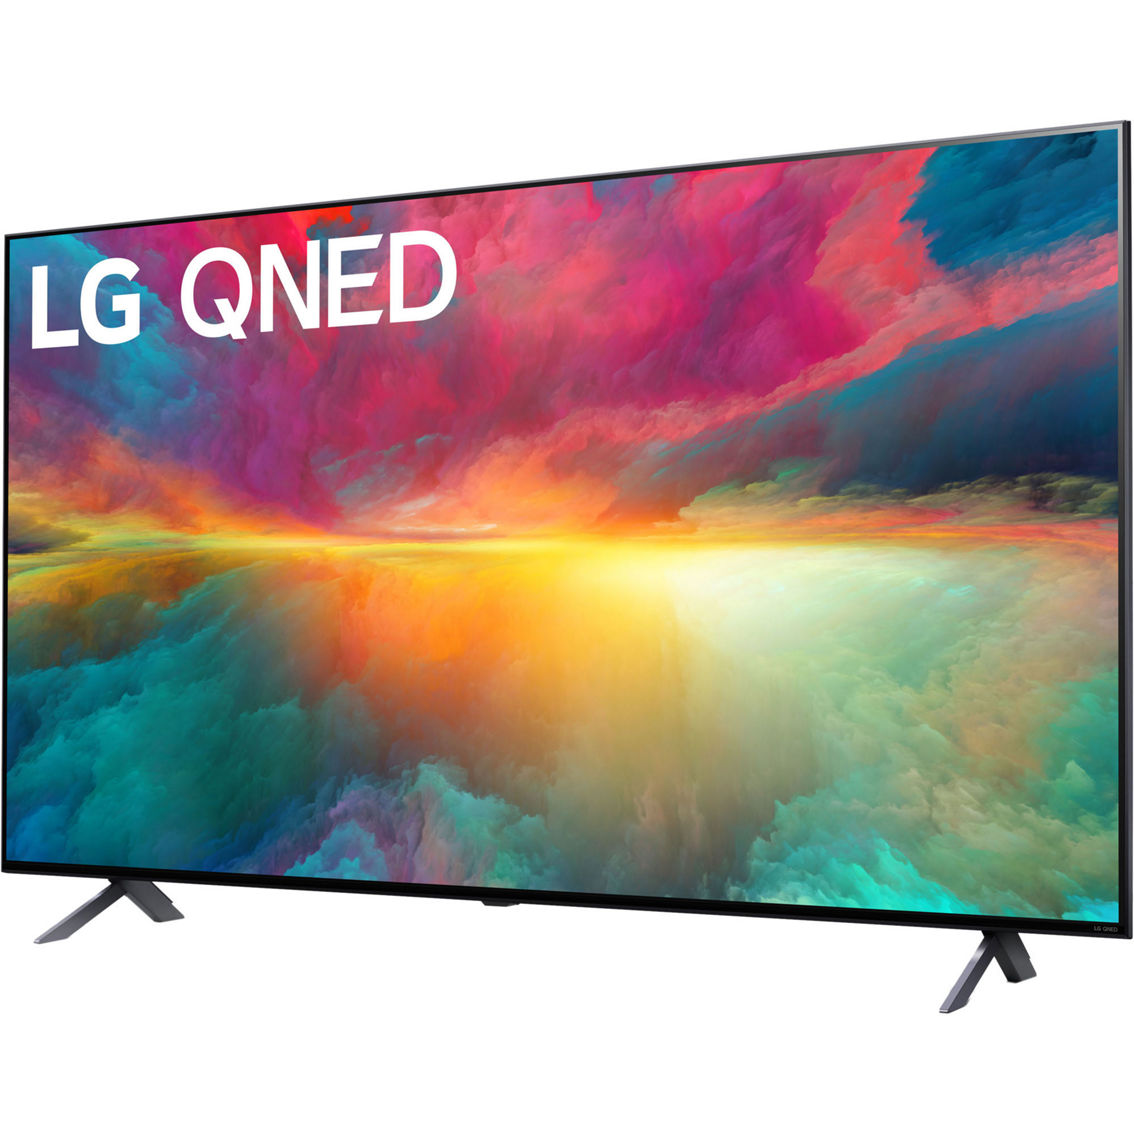 LG 50 in. QNED 4K HDR Smart TV with AI ThinQ 50QNED75URA - Image 4 of 10